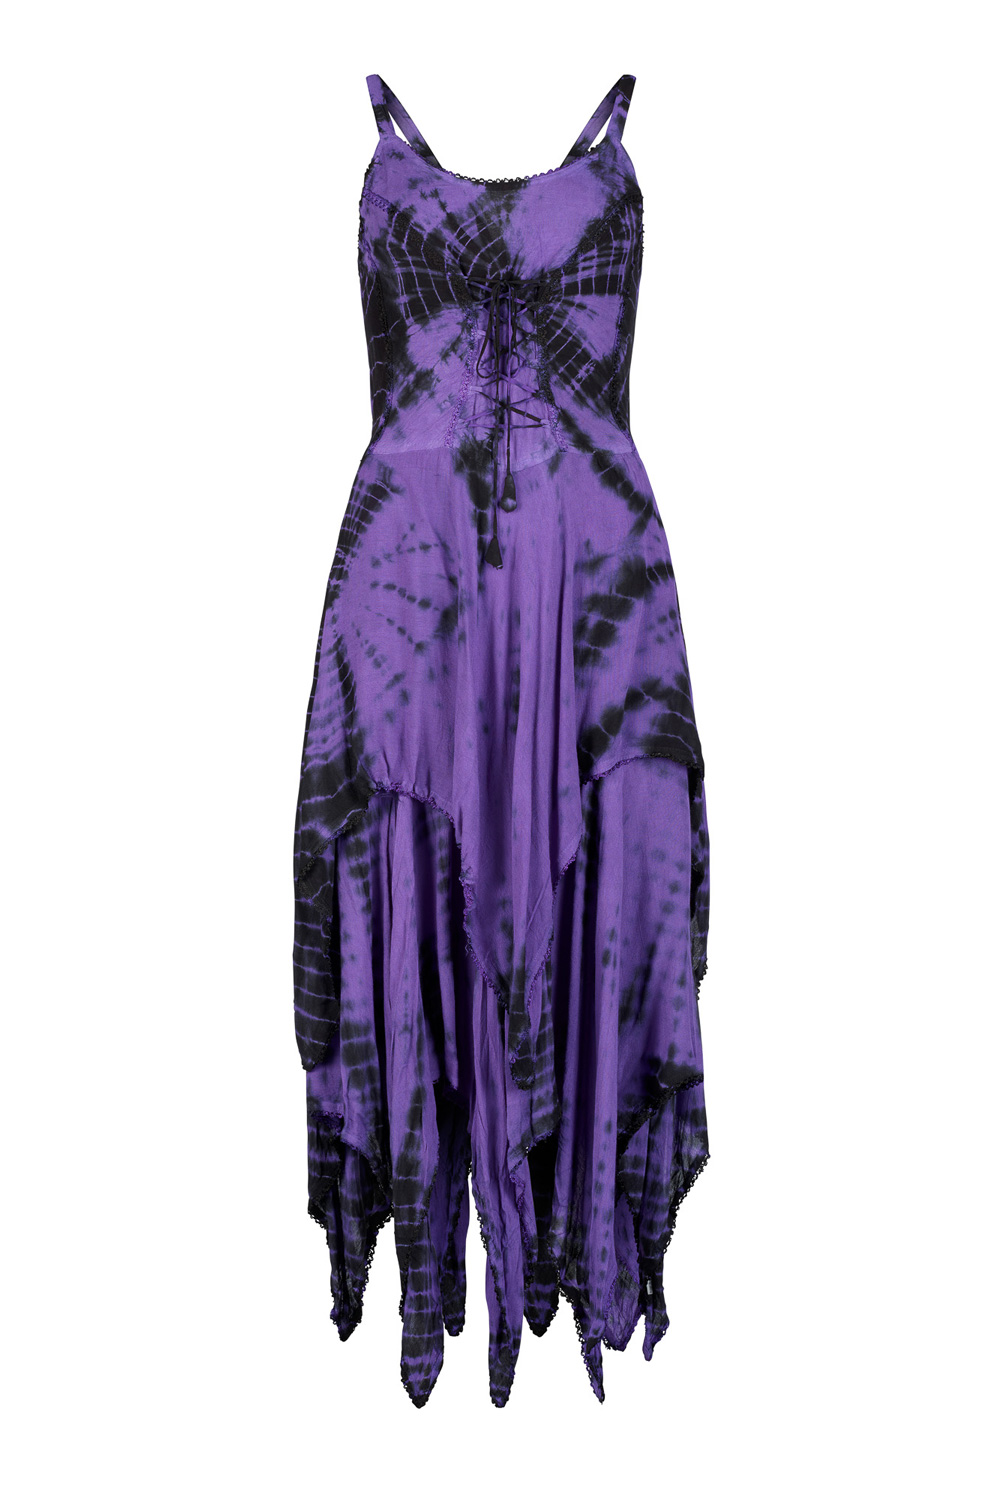 Wicked Dragon Clothing - Tie dye lace up pixie dress